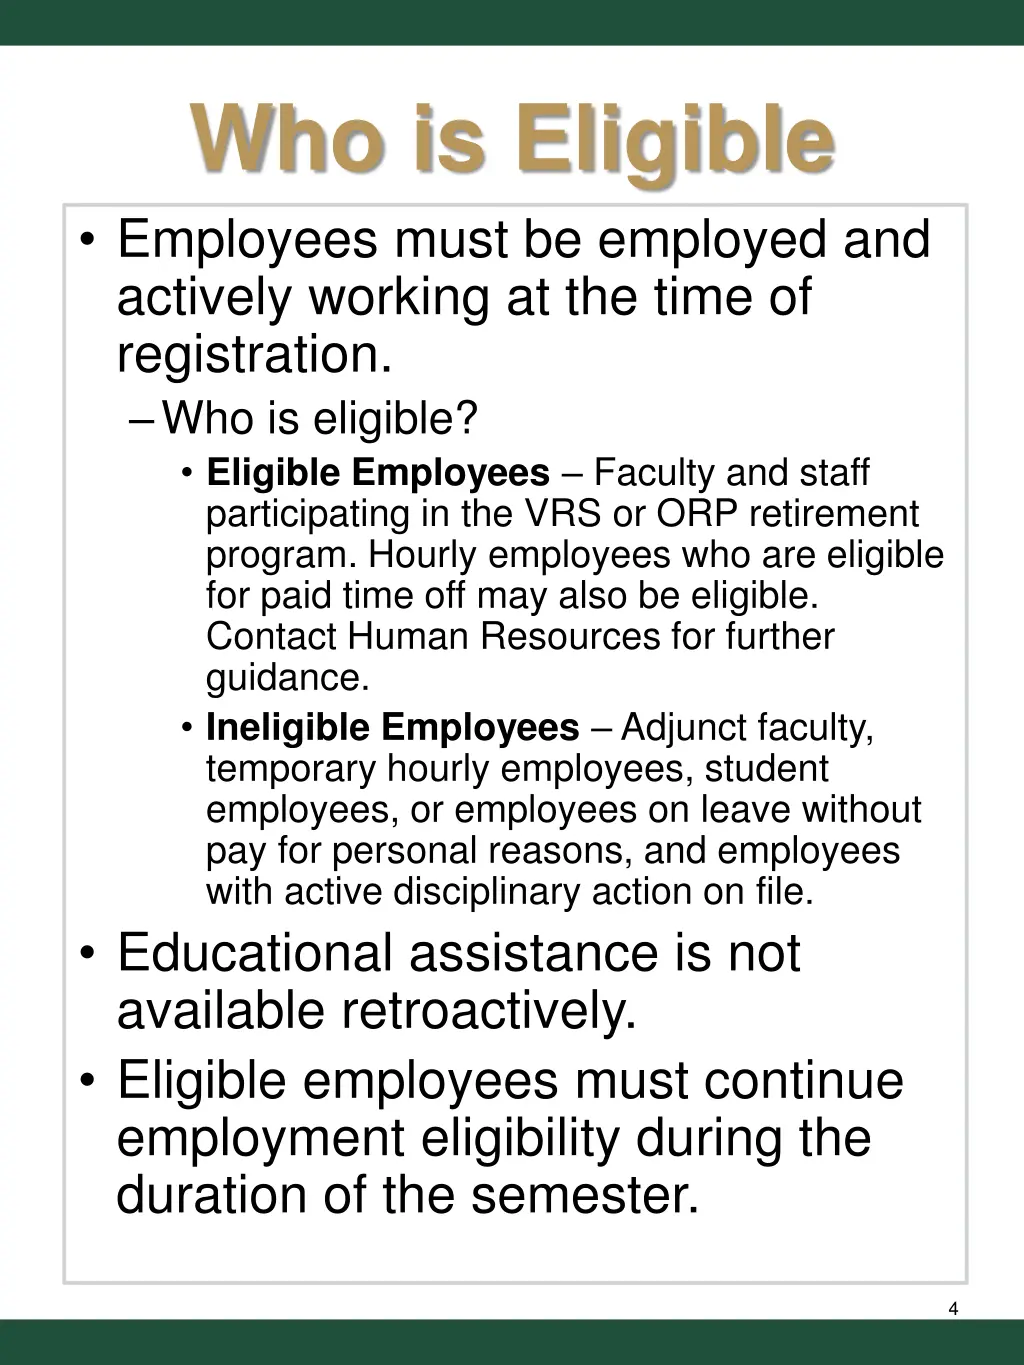 who is eligible employees must be employed